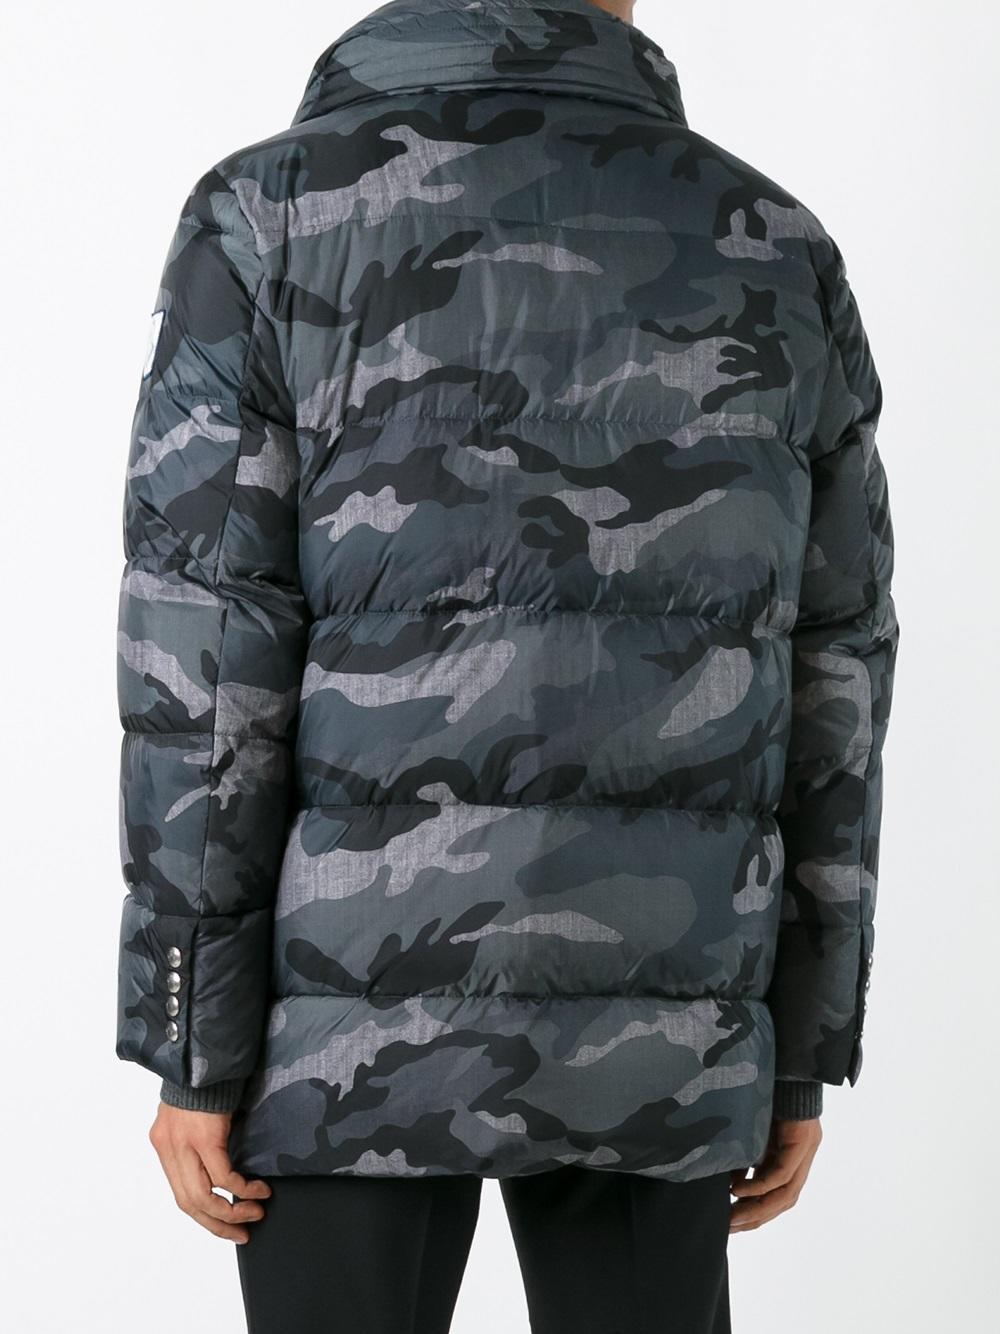 Lyst - Moncler Camouflage Print Coat in Gray for Men